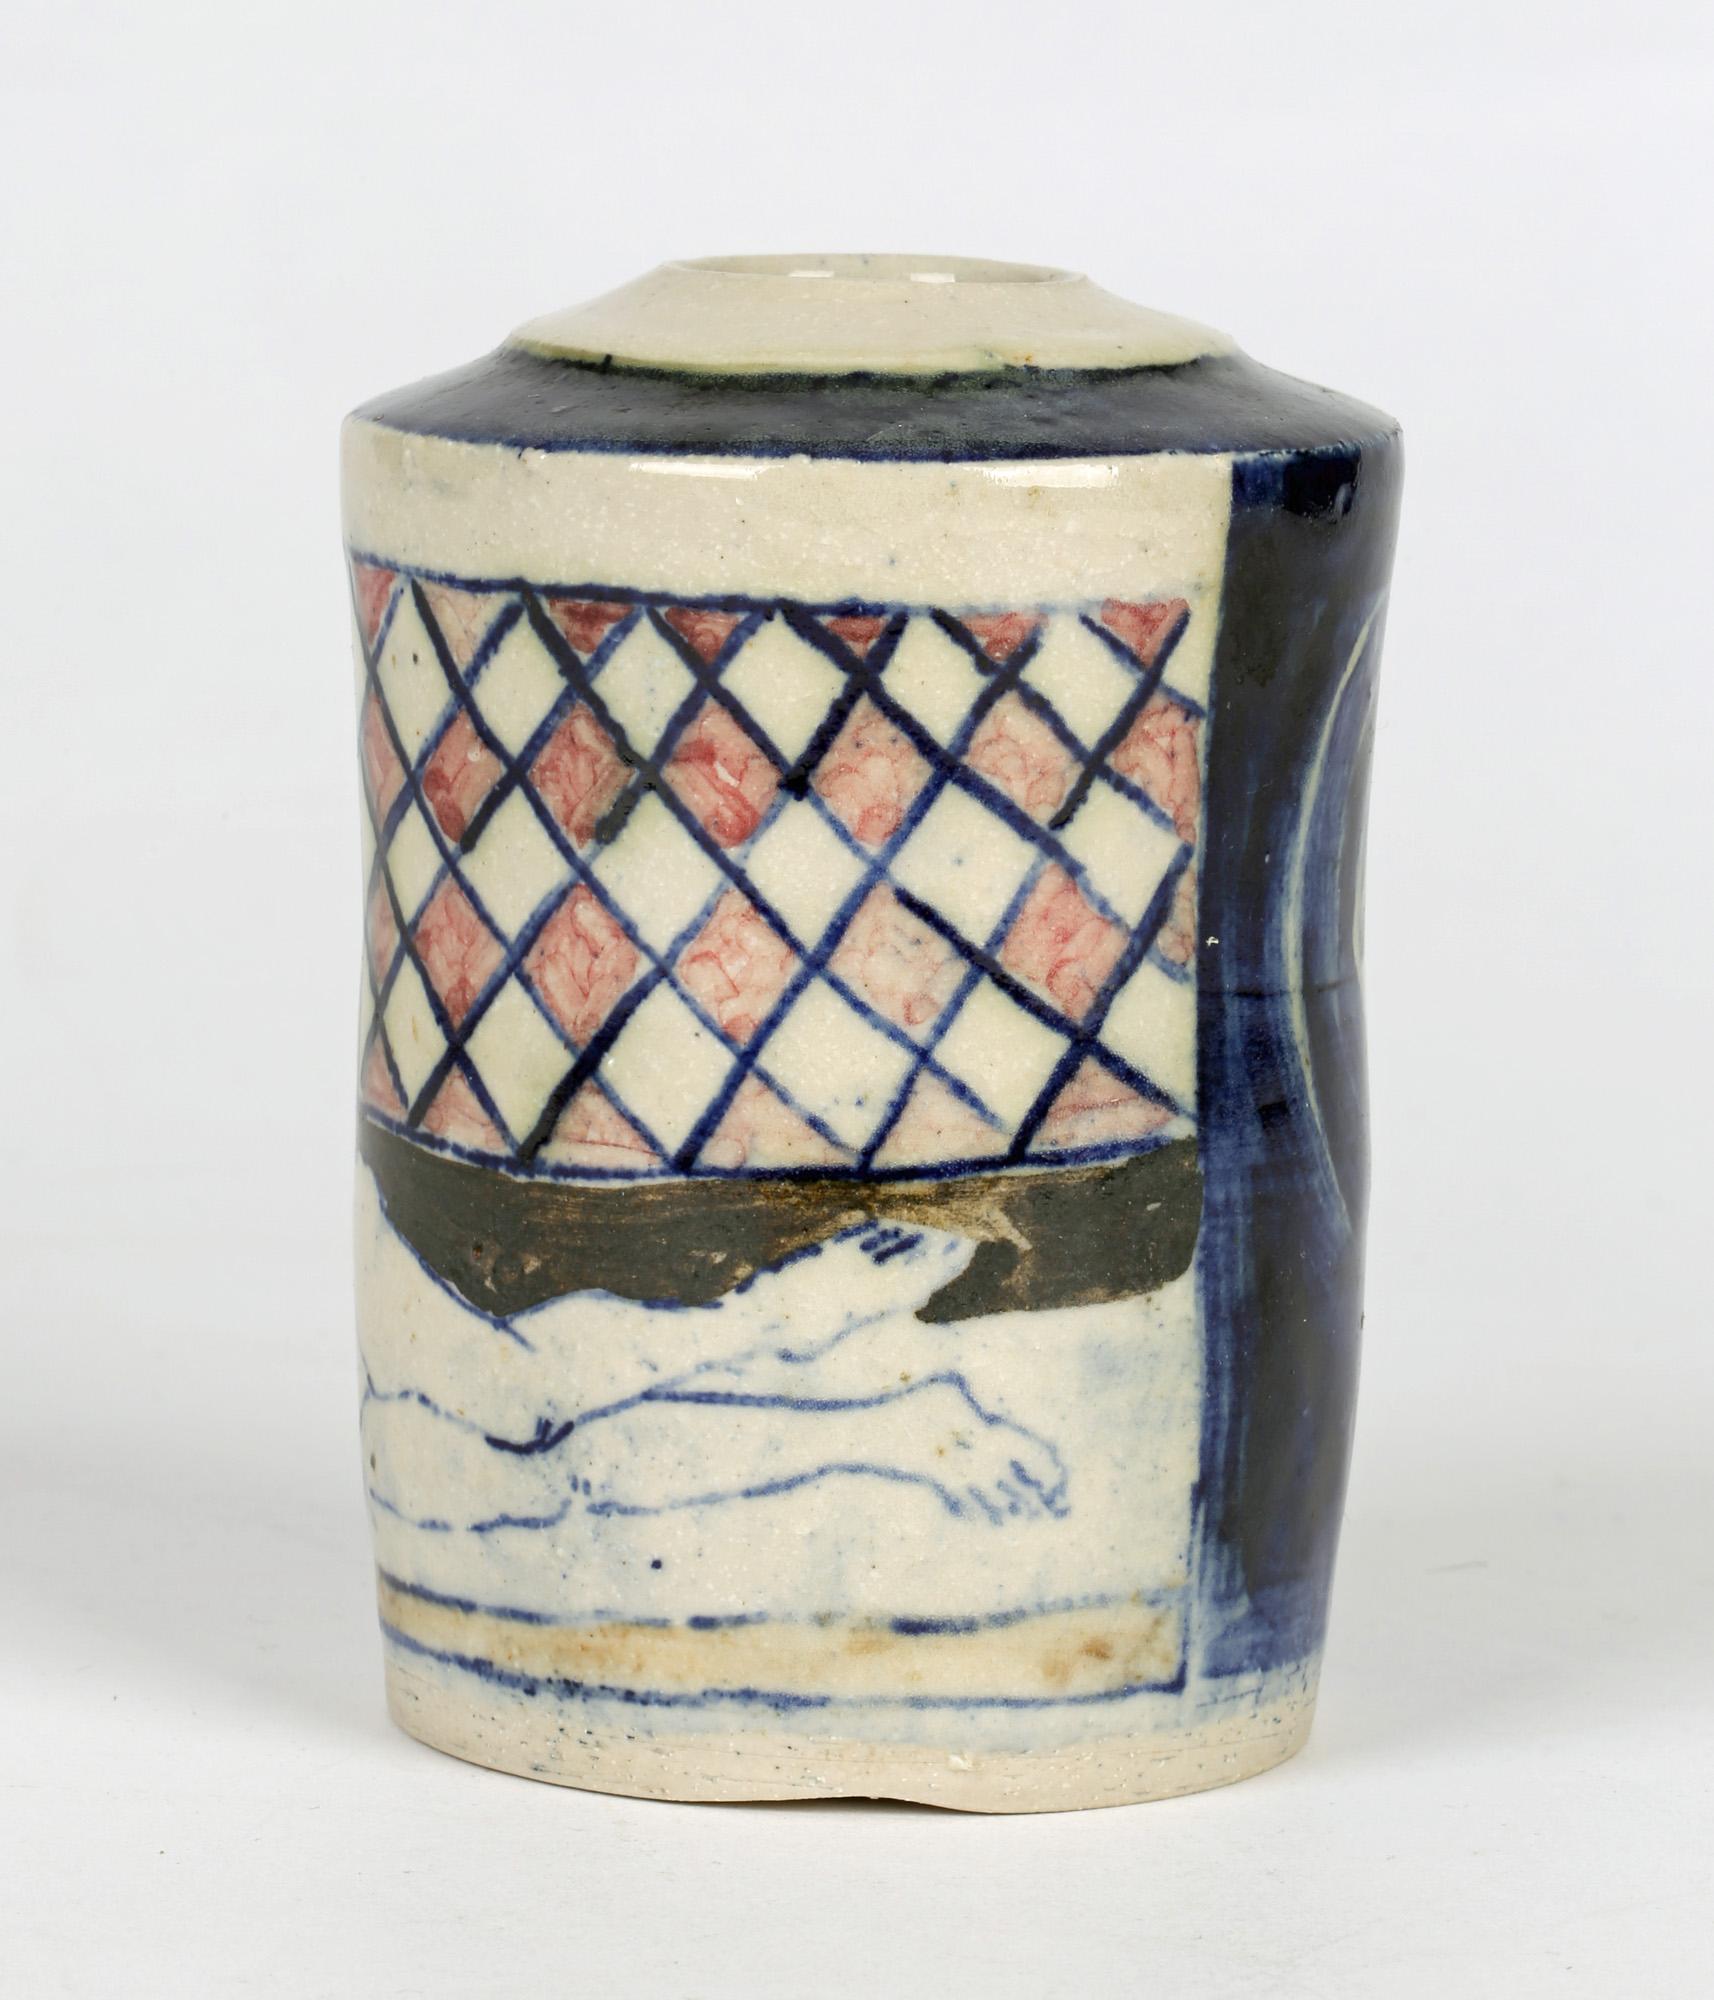 A stylish British studio pottery vase painted with nude figures by renowned potter Eric James Mellon (1925-2014) and dating from around 2000. The vase is of cylindrical shape and potted in porcelain with a slightly domed top with a narrow rounded